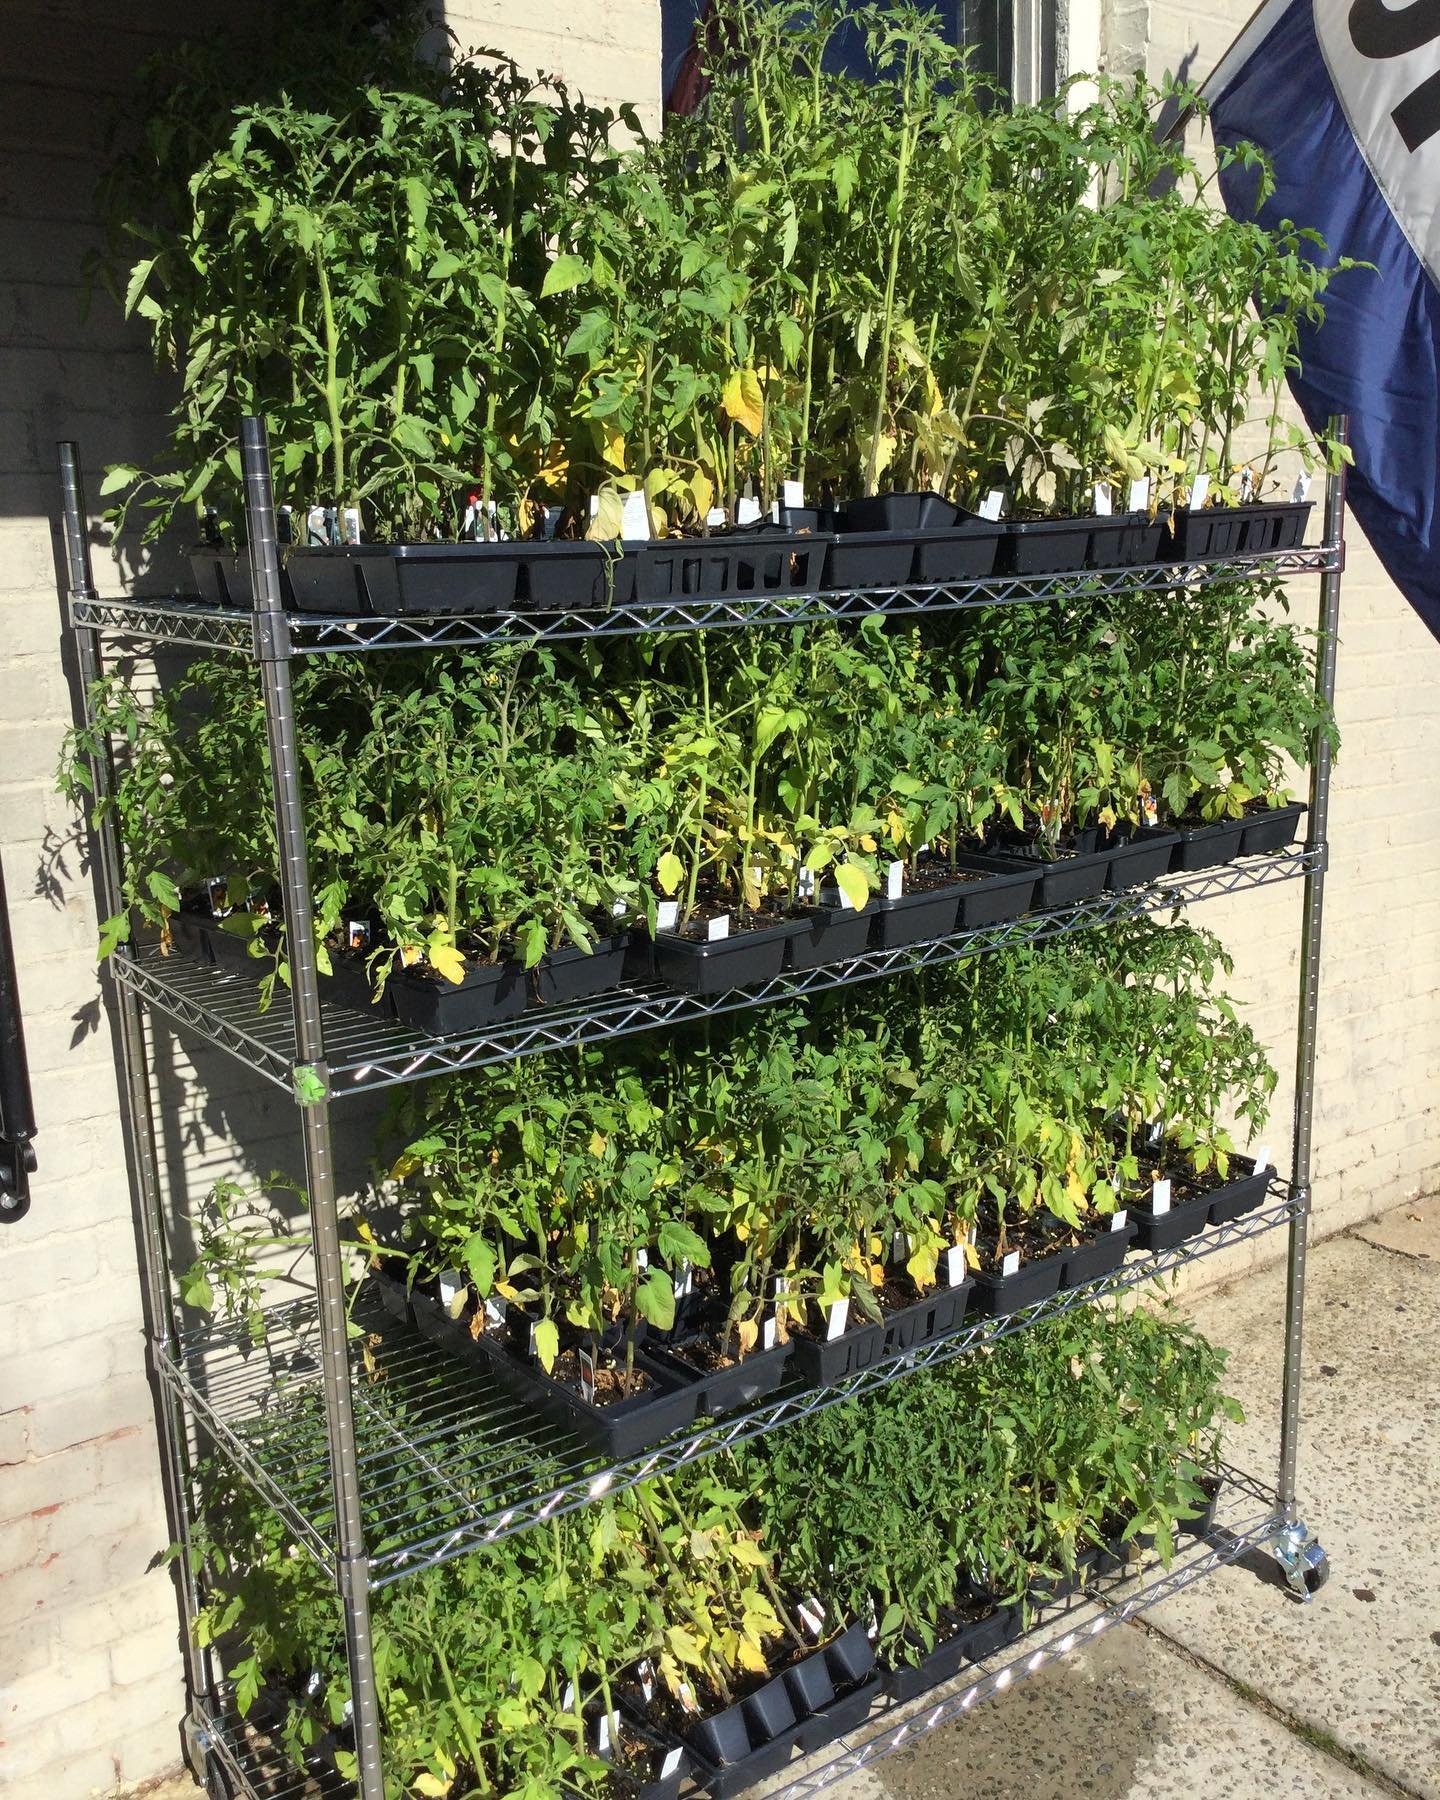 We have tomatoes plants, just $1.00 each!!